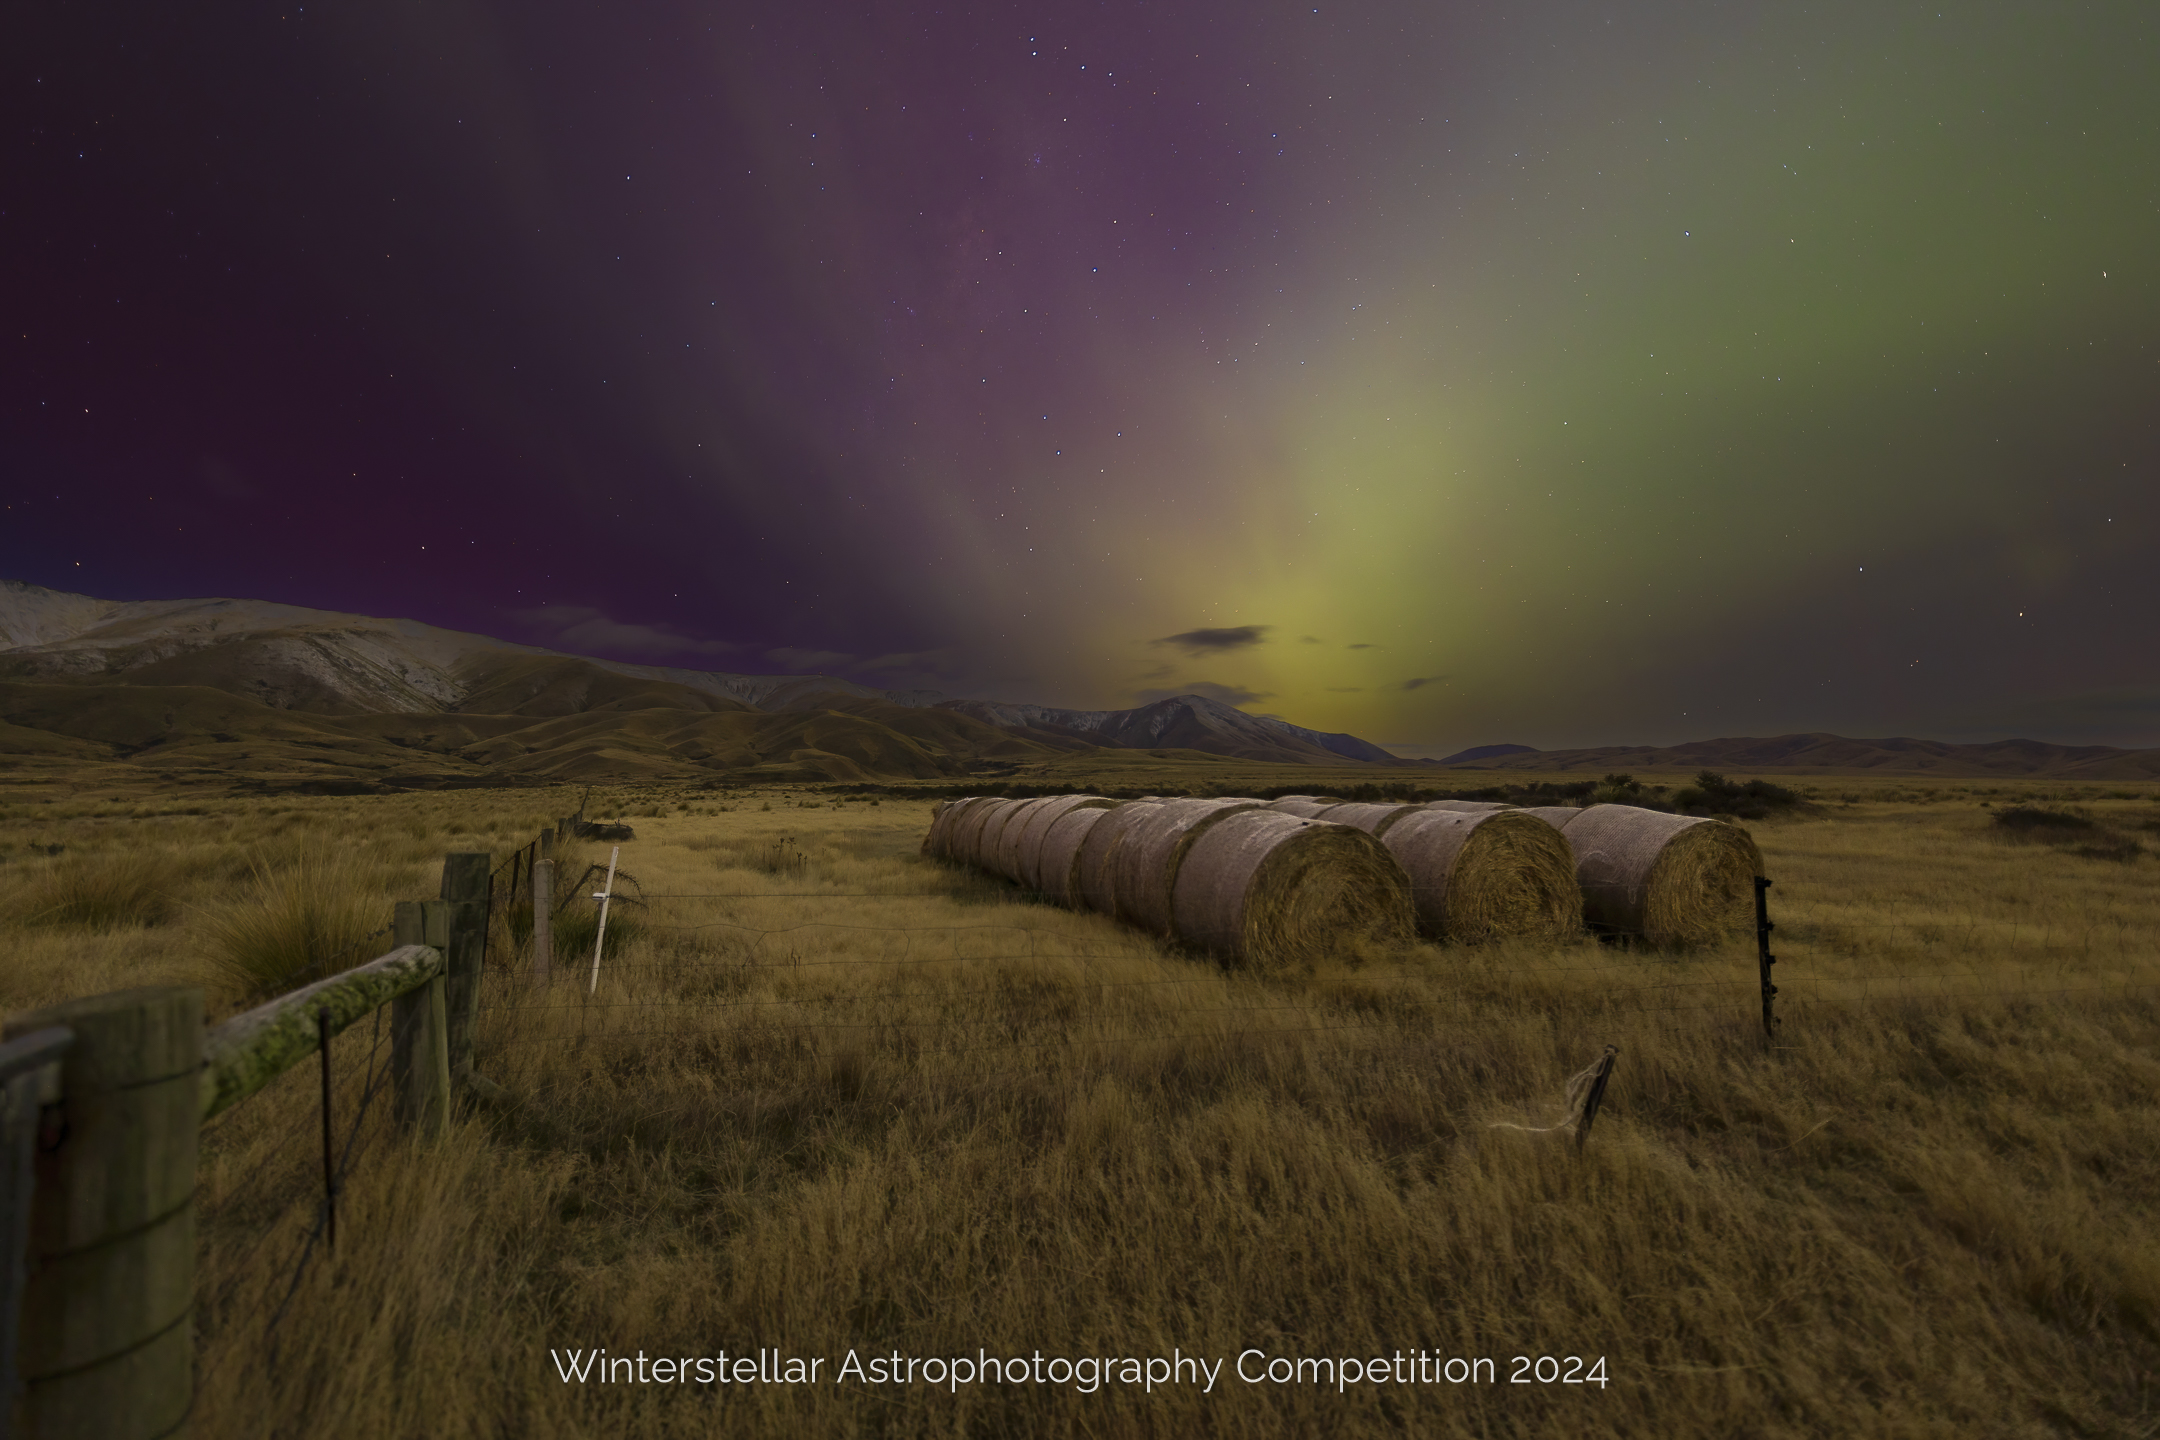 Green glow of an Aurora over distant hills and line of round hay bails.